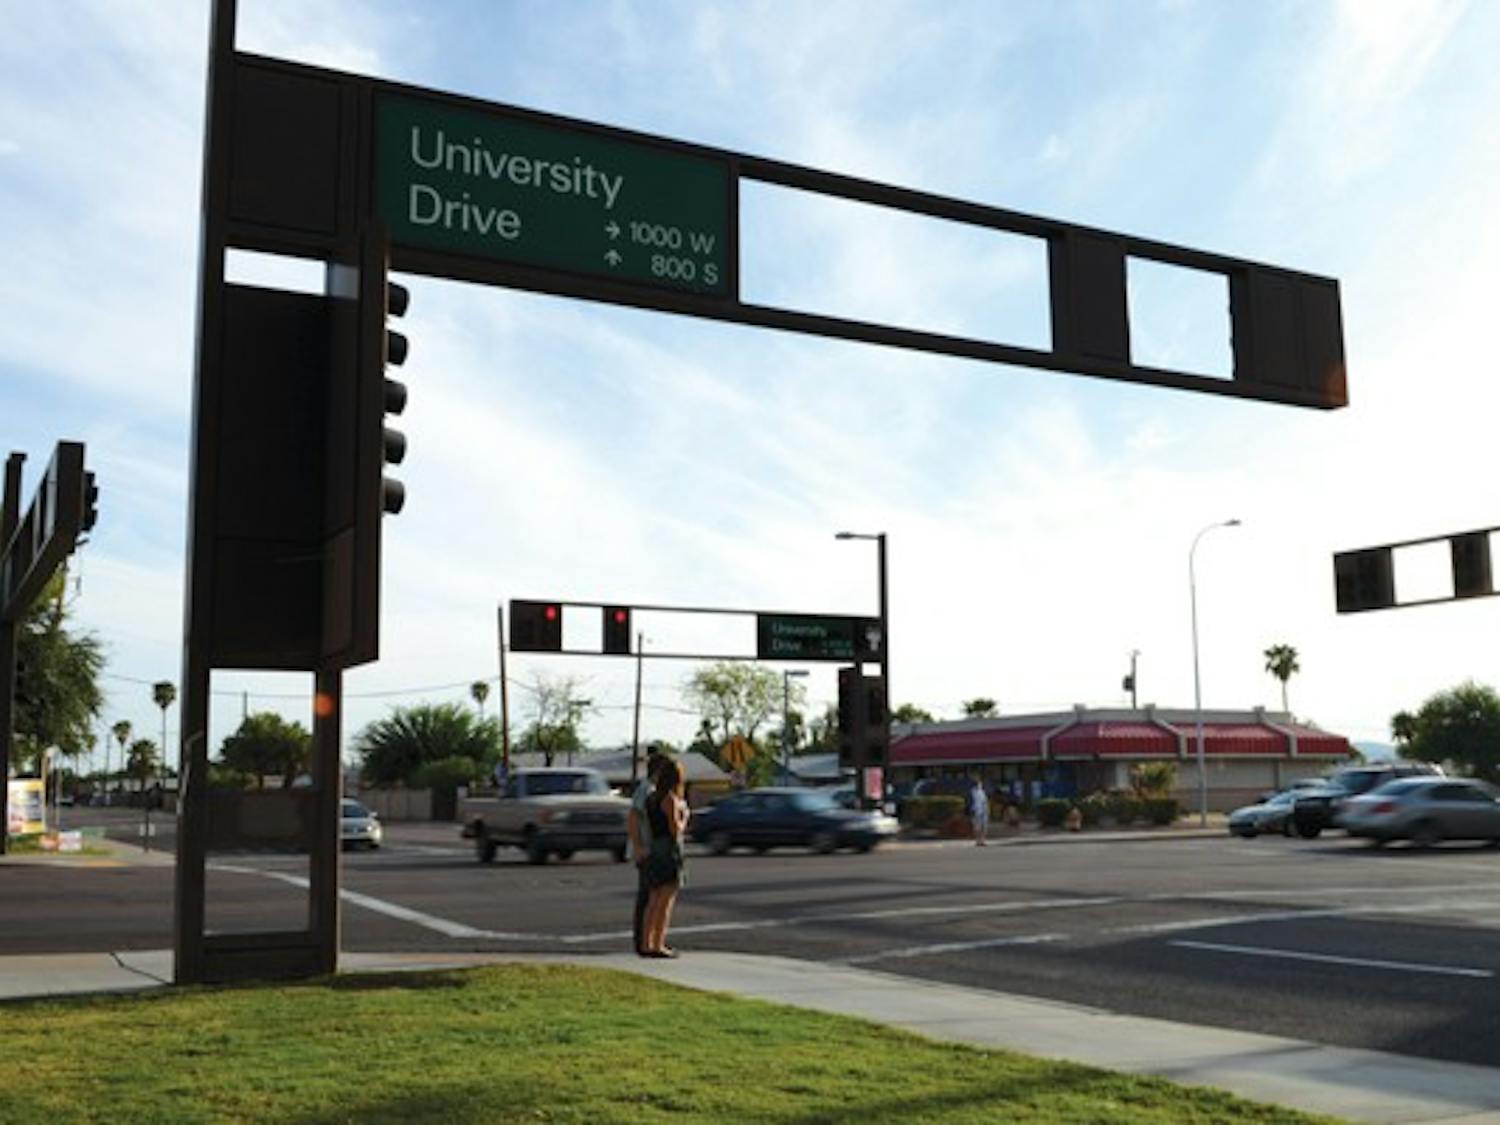 Pedestrians wait to cross the street on the corner of University and Hardy drives.  The City of Tempe is planning to update University Drive from Ash Avenue to Priest Drive with new streetscaping, bike lanes and two new crosswalks. (Photo by Kurtis Semph)